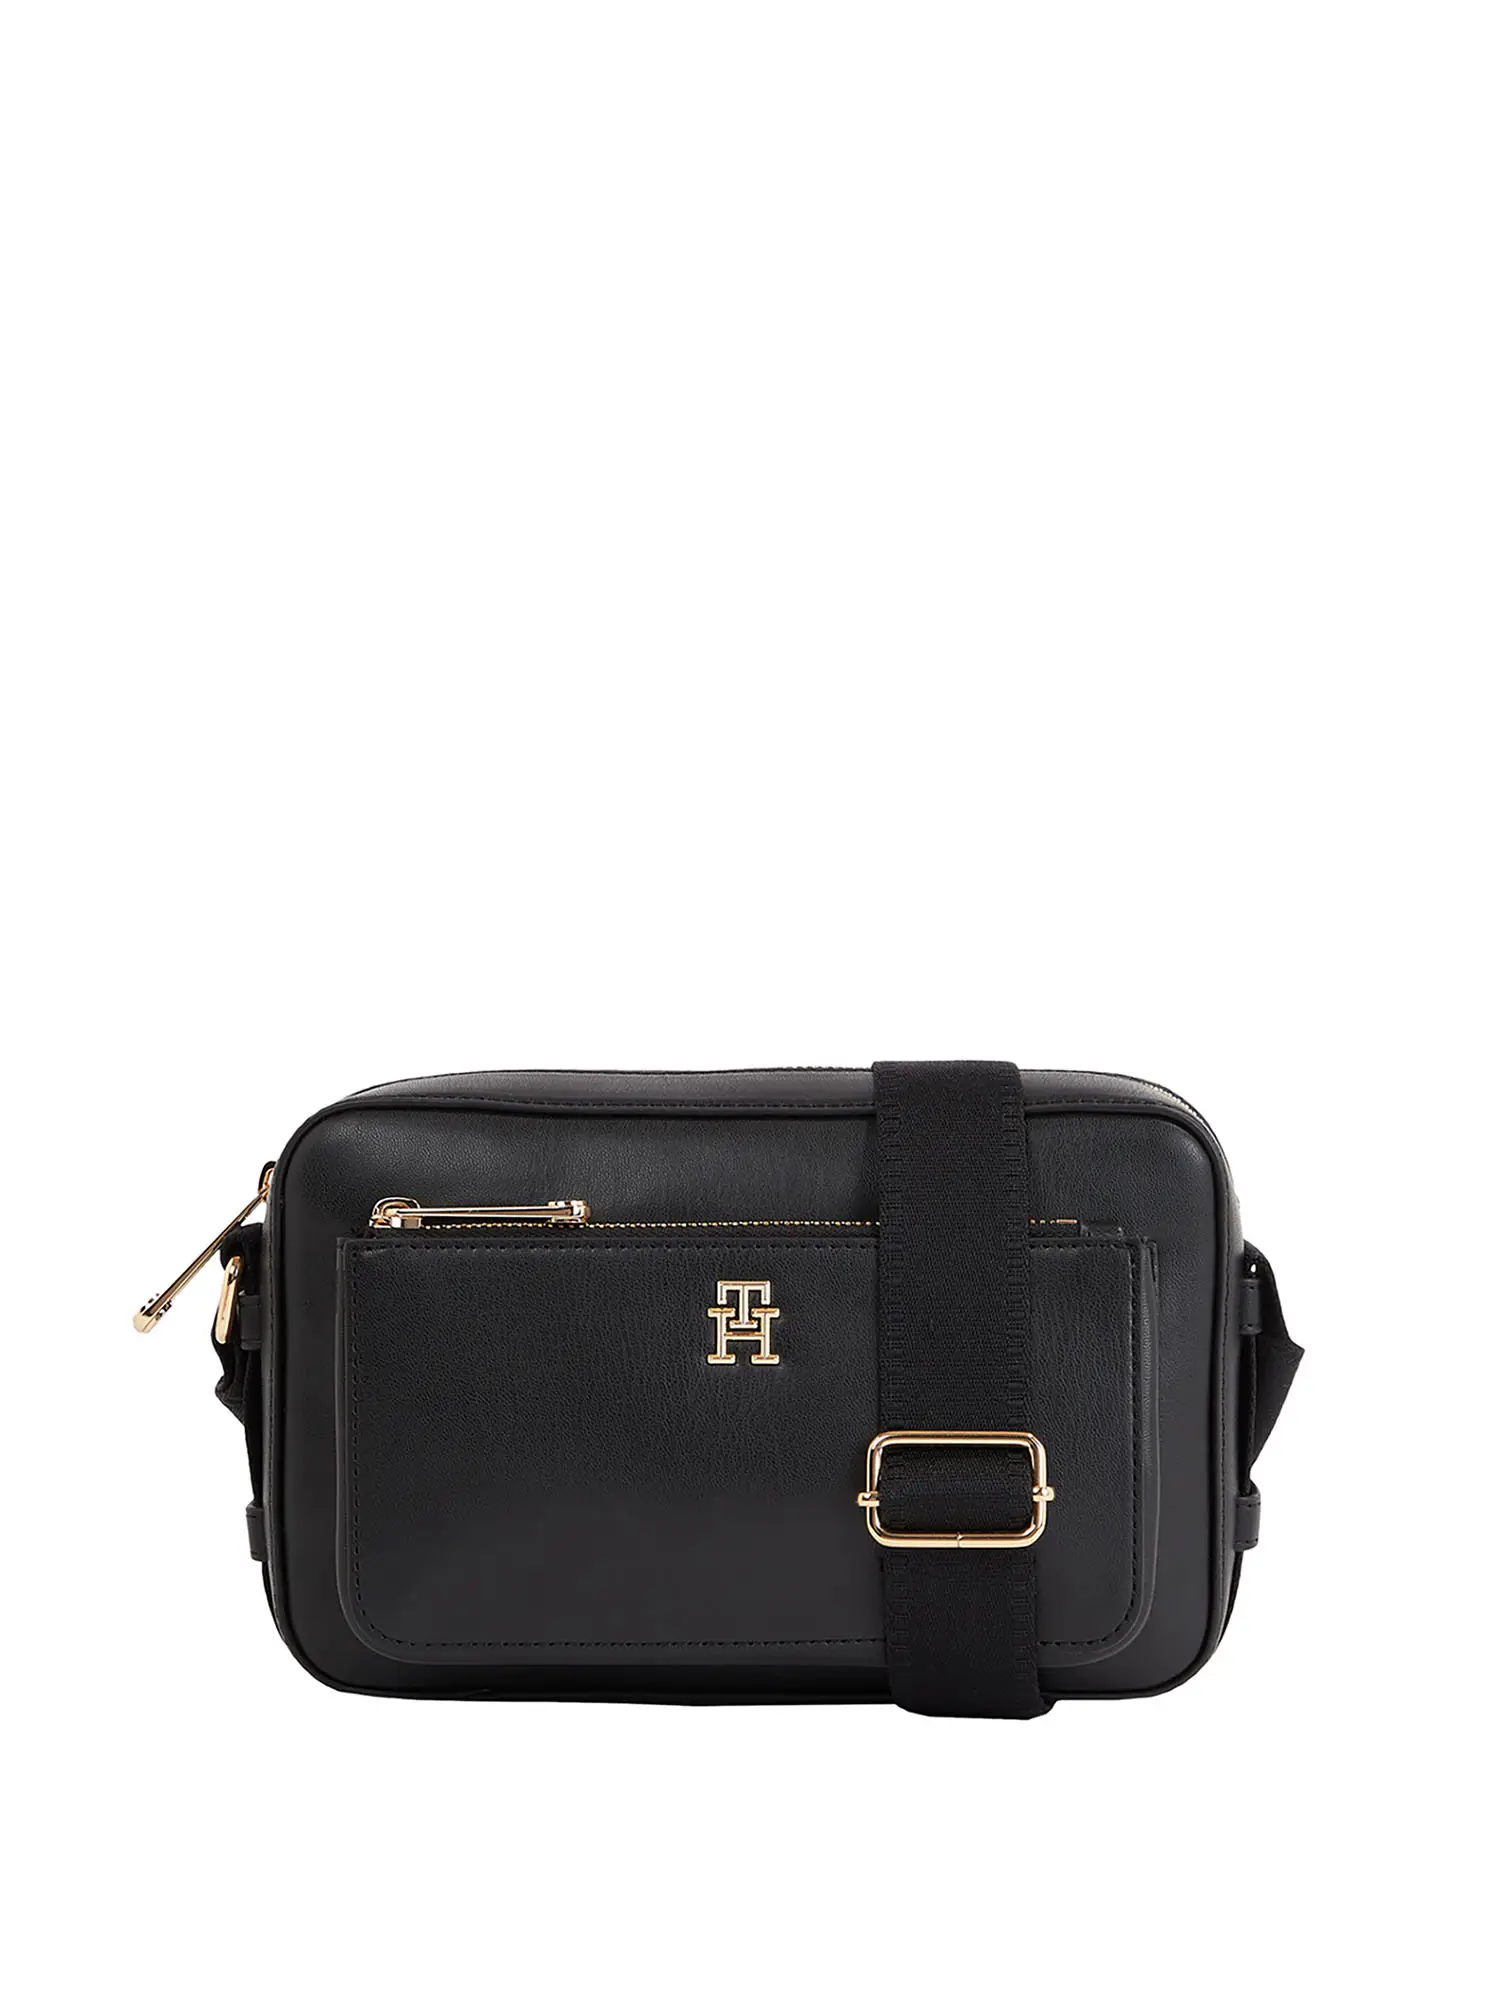 TRACOLLA DONNA - TOMMY HILFIGER - AW0AW15991 - NERO, UNICA